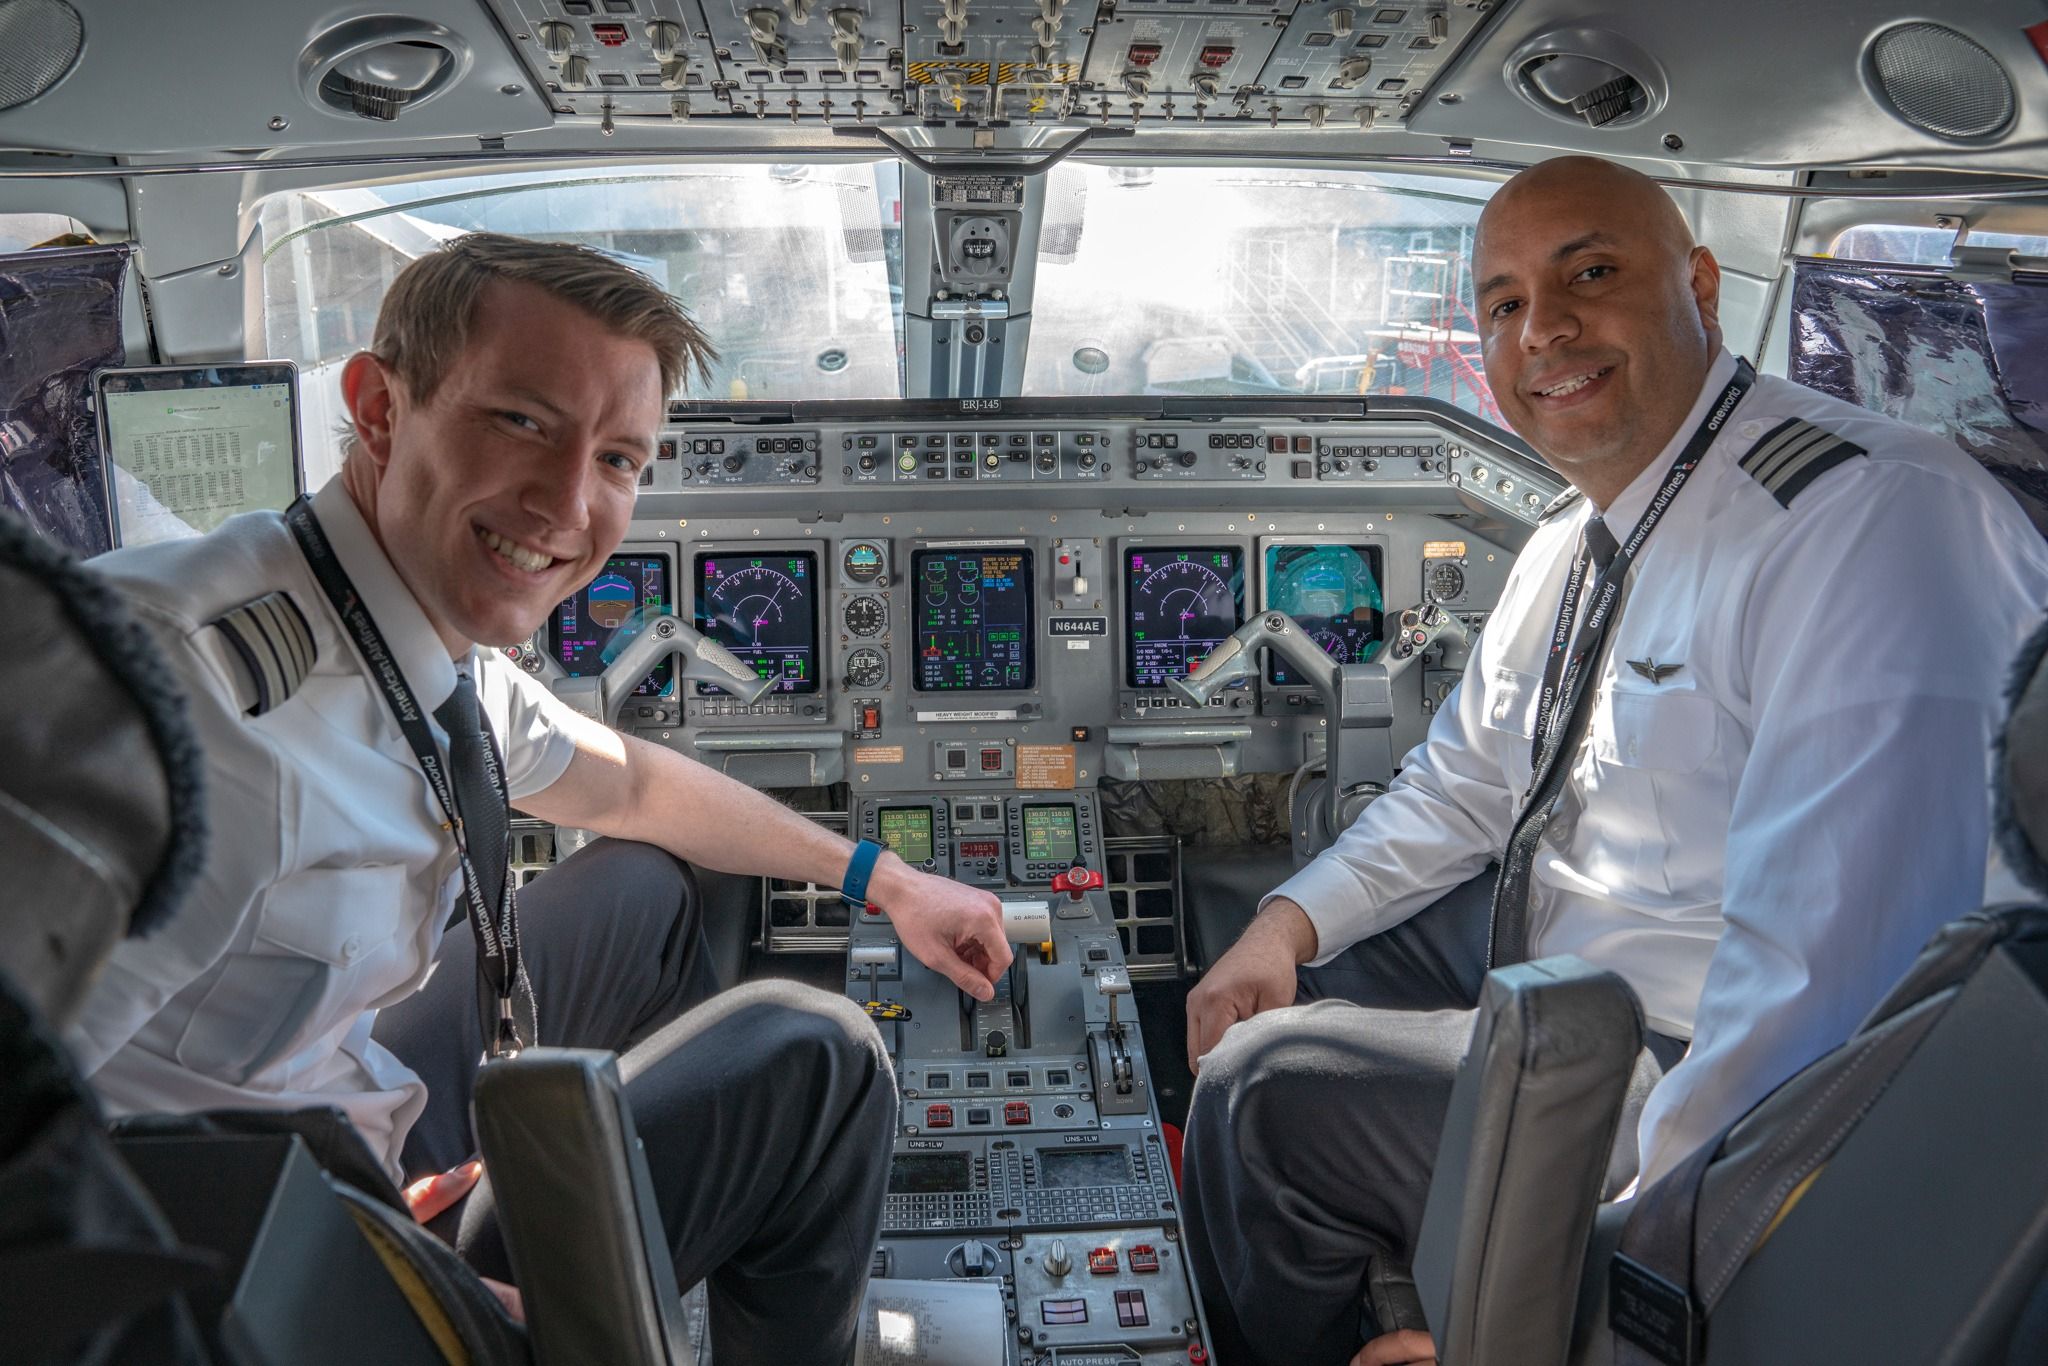 Two Piedmont Airlines pilots in a cockpit.